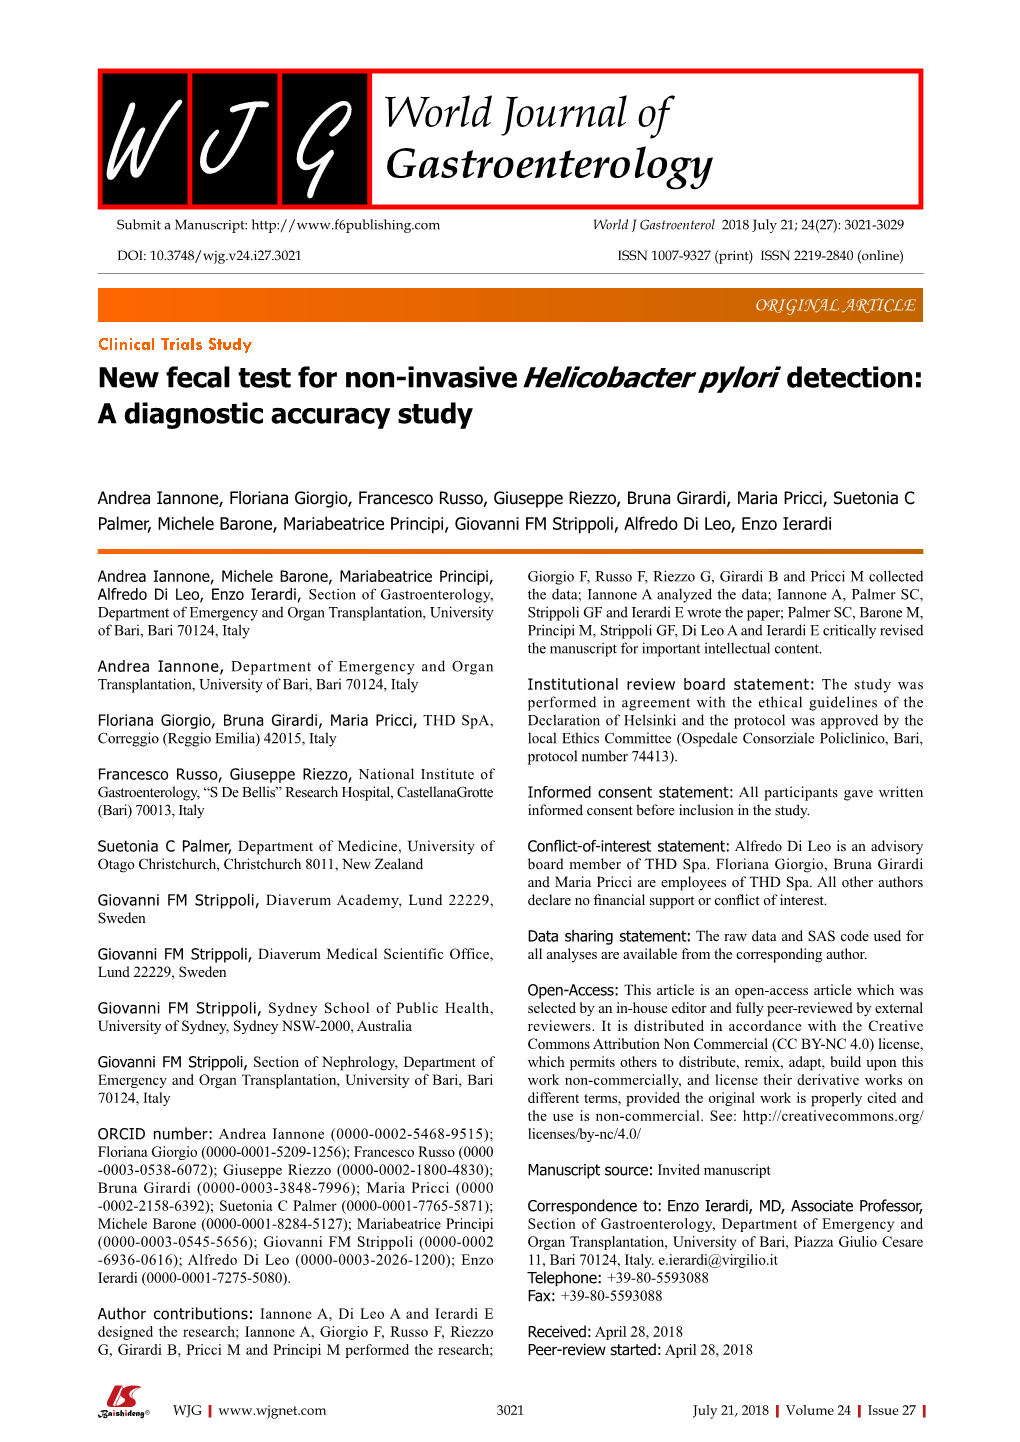 New Fecal Test for Non-Invasive Helicobacter Pylori Detection: a Diagnostic Accuracy Study